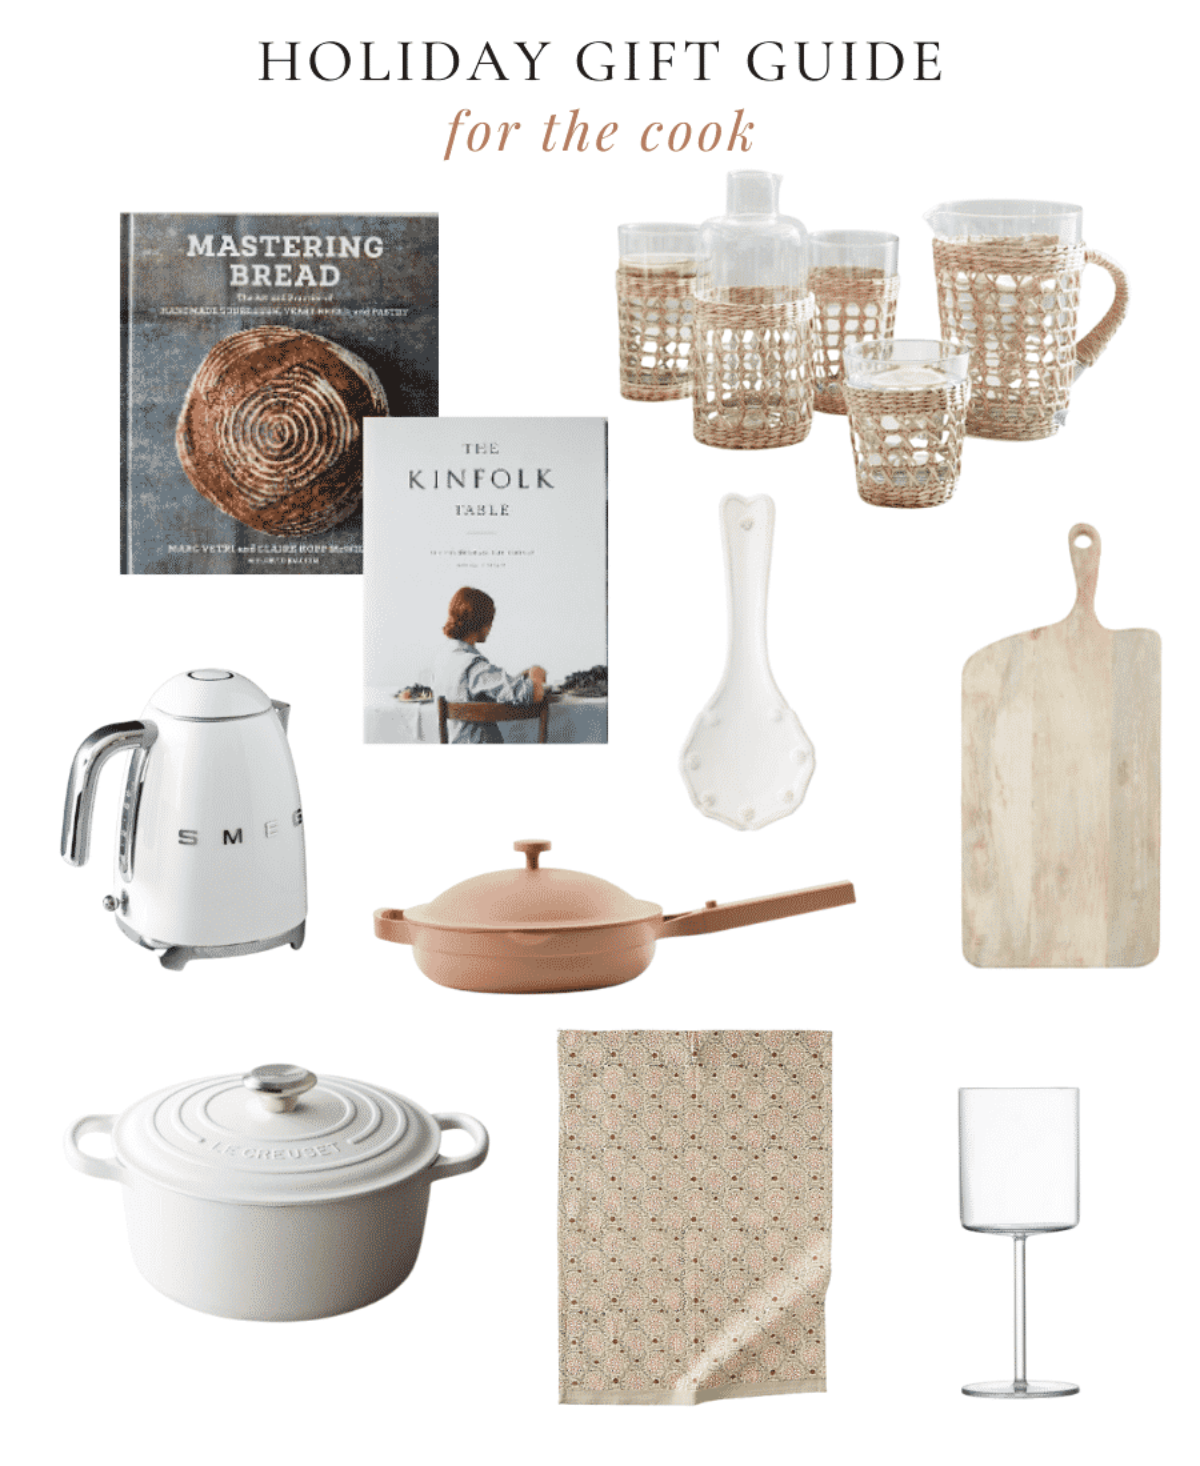 https://purejoyhome.com/wp-content/uploads/2021/10/holiday-gift-guide-cook-1200x1466.png